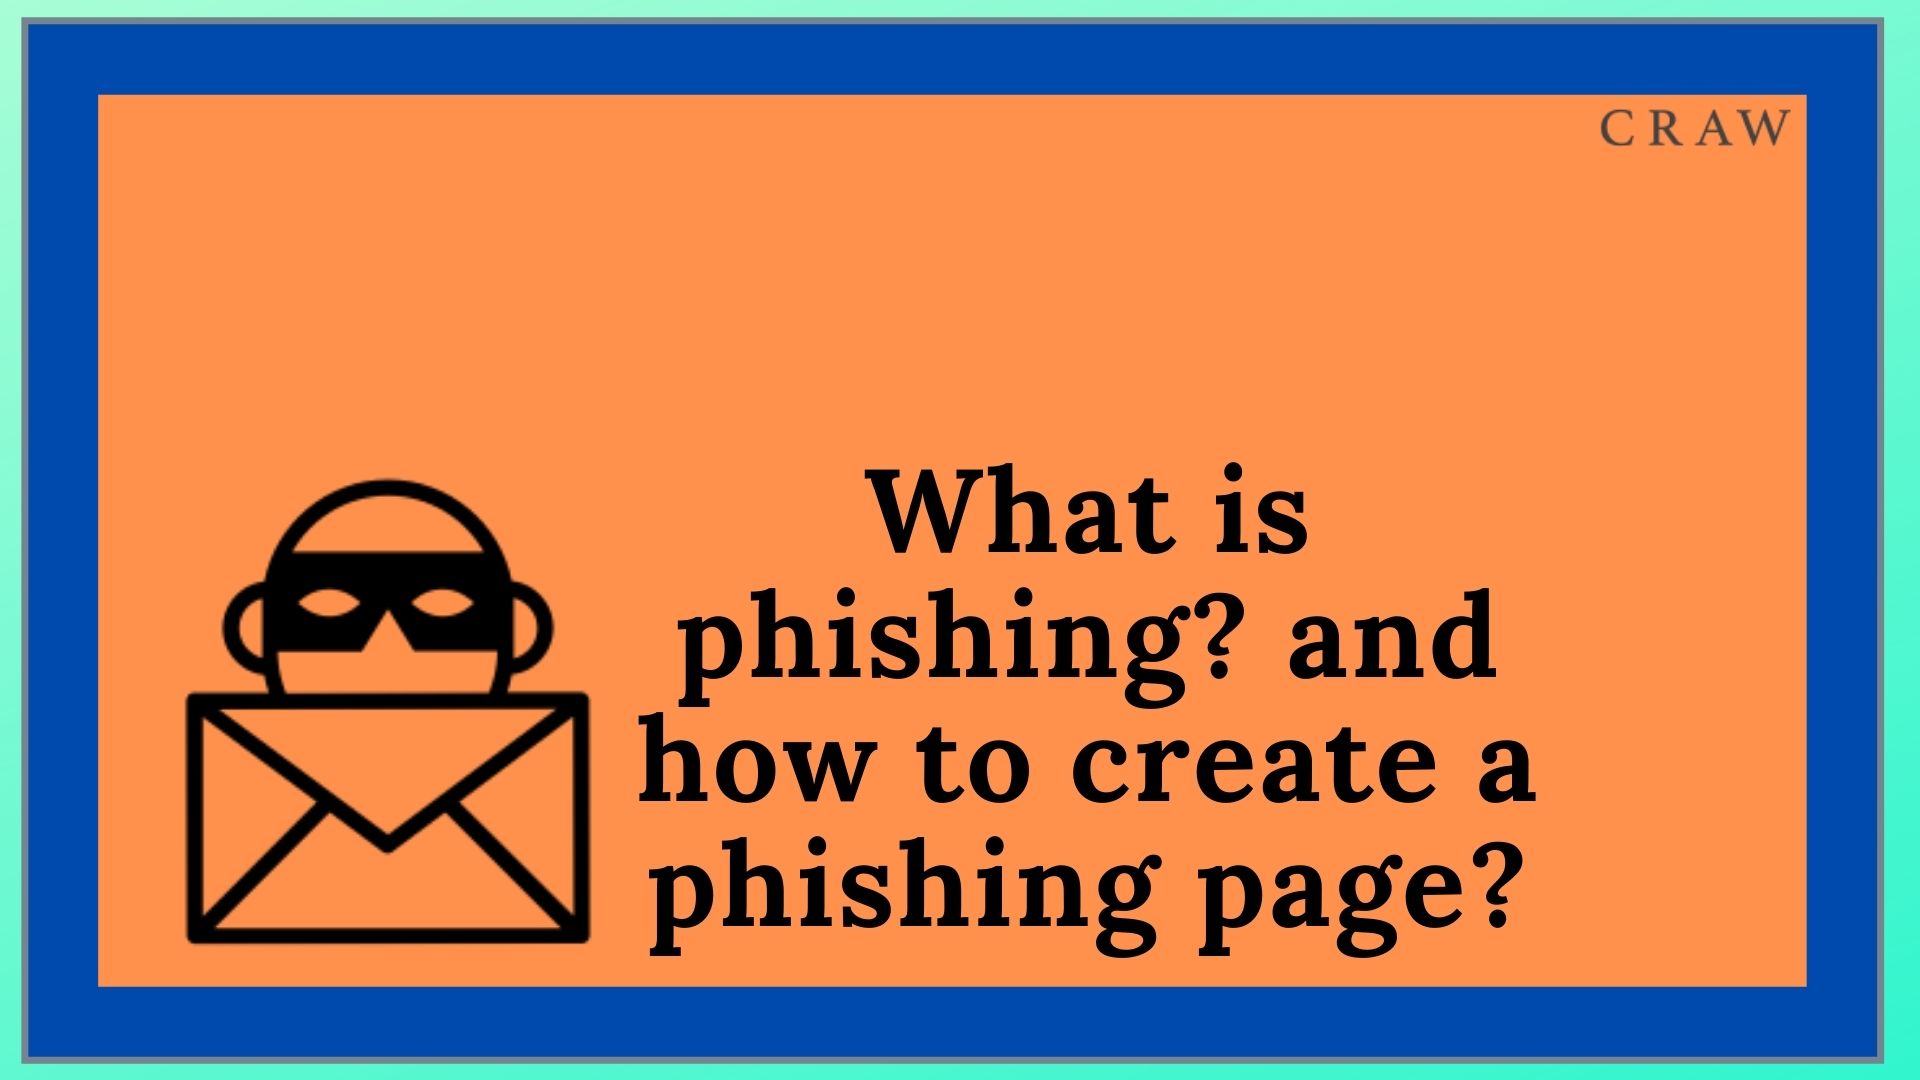 What is phishing? and how to create a phishing page?